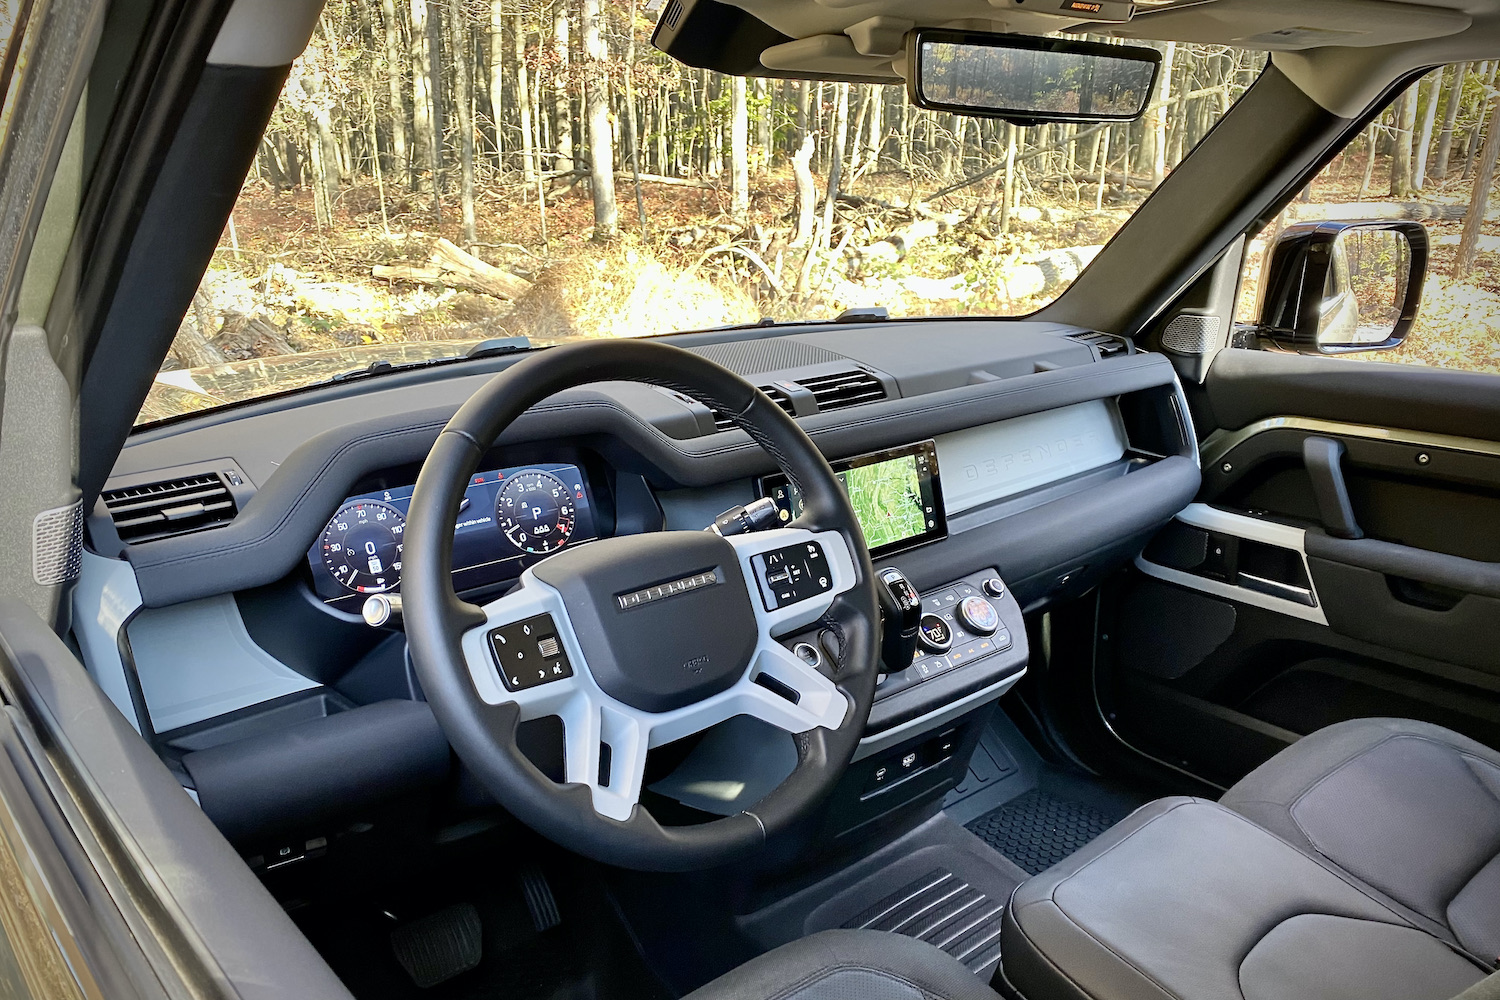 Dashboard of Land Rover Defender from driver's side with trees in the back.